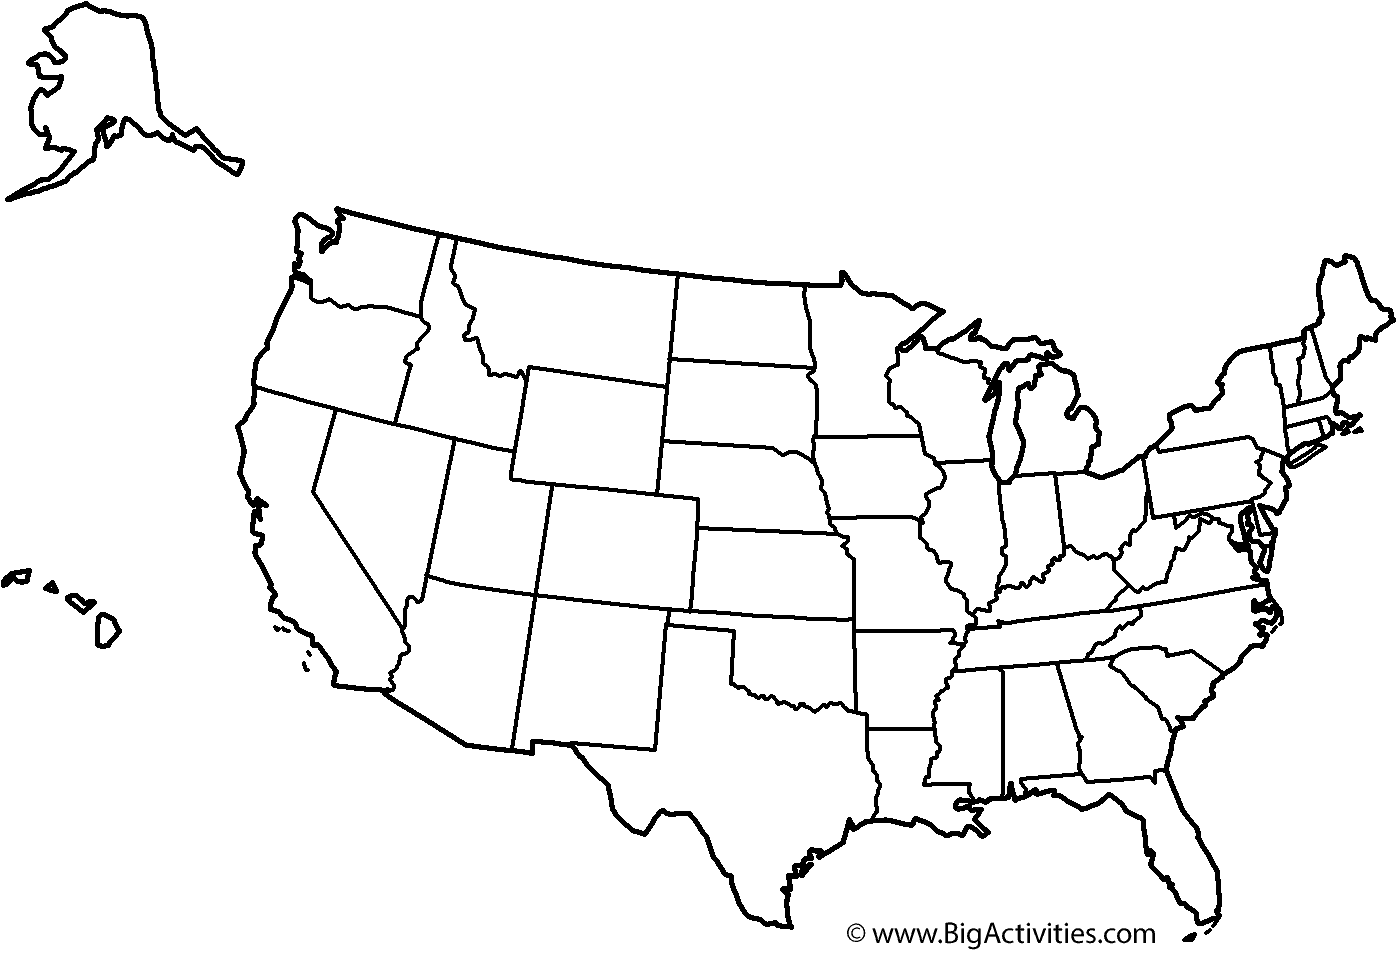 Download Map of the United States with theme and states - Coloring Page (Memorial Day)